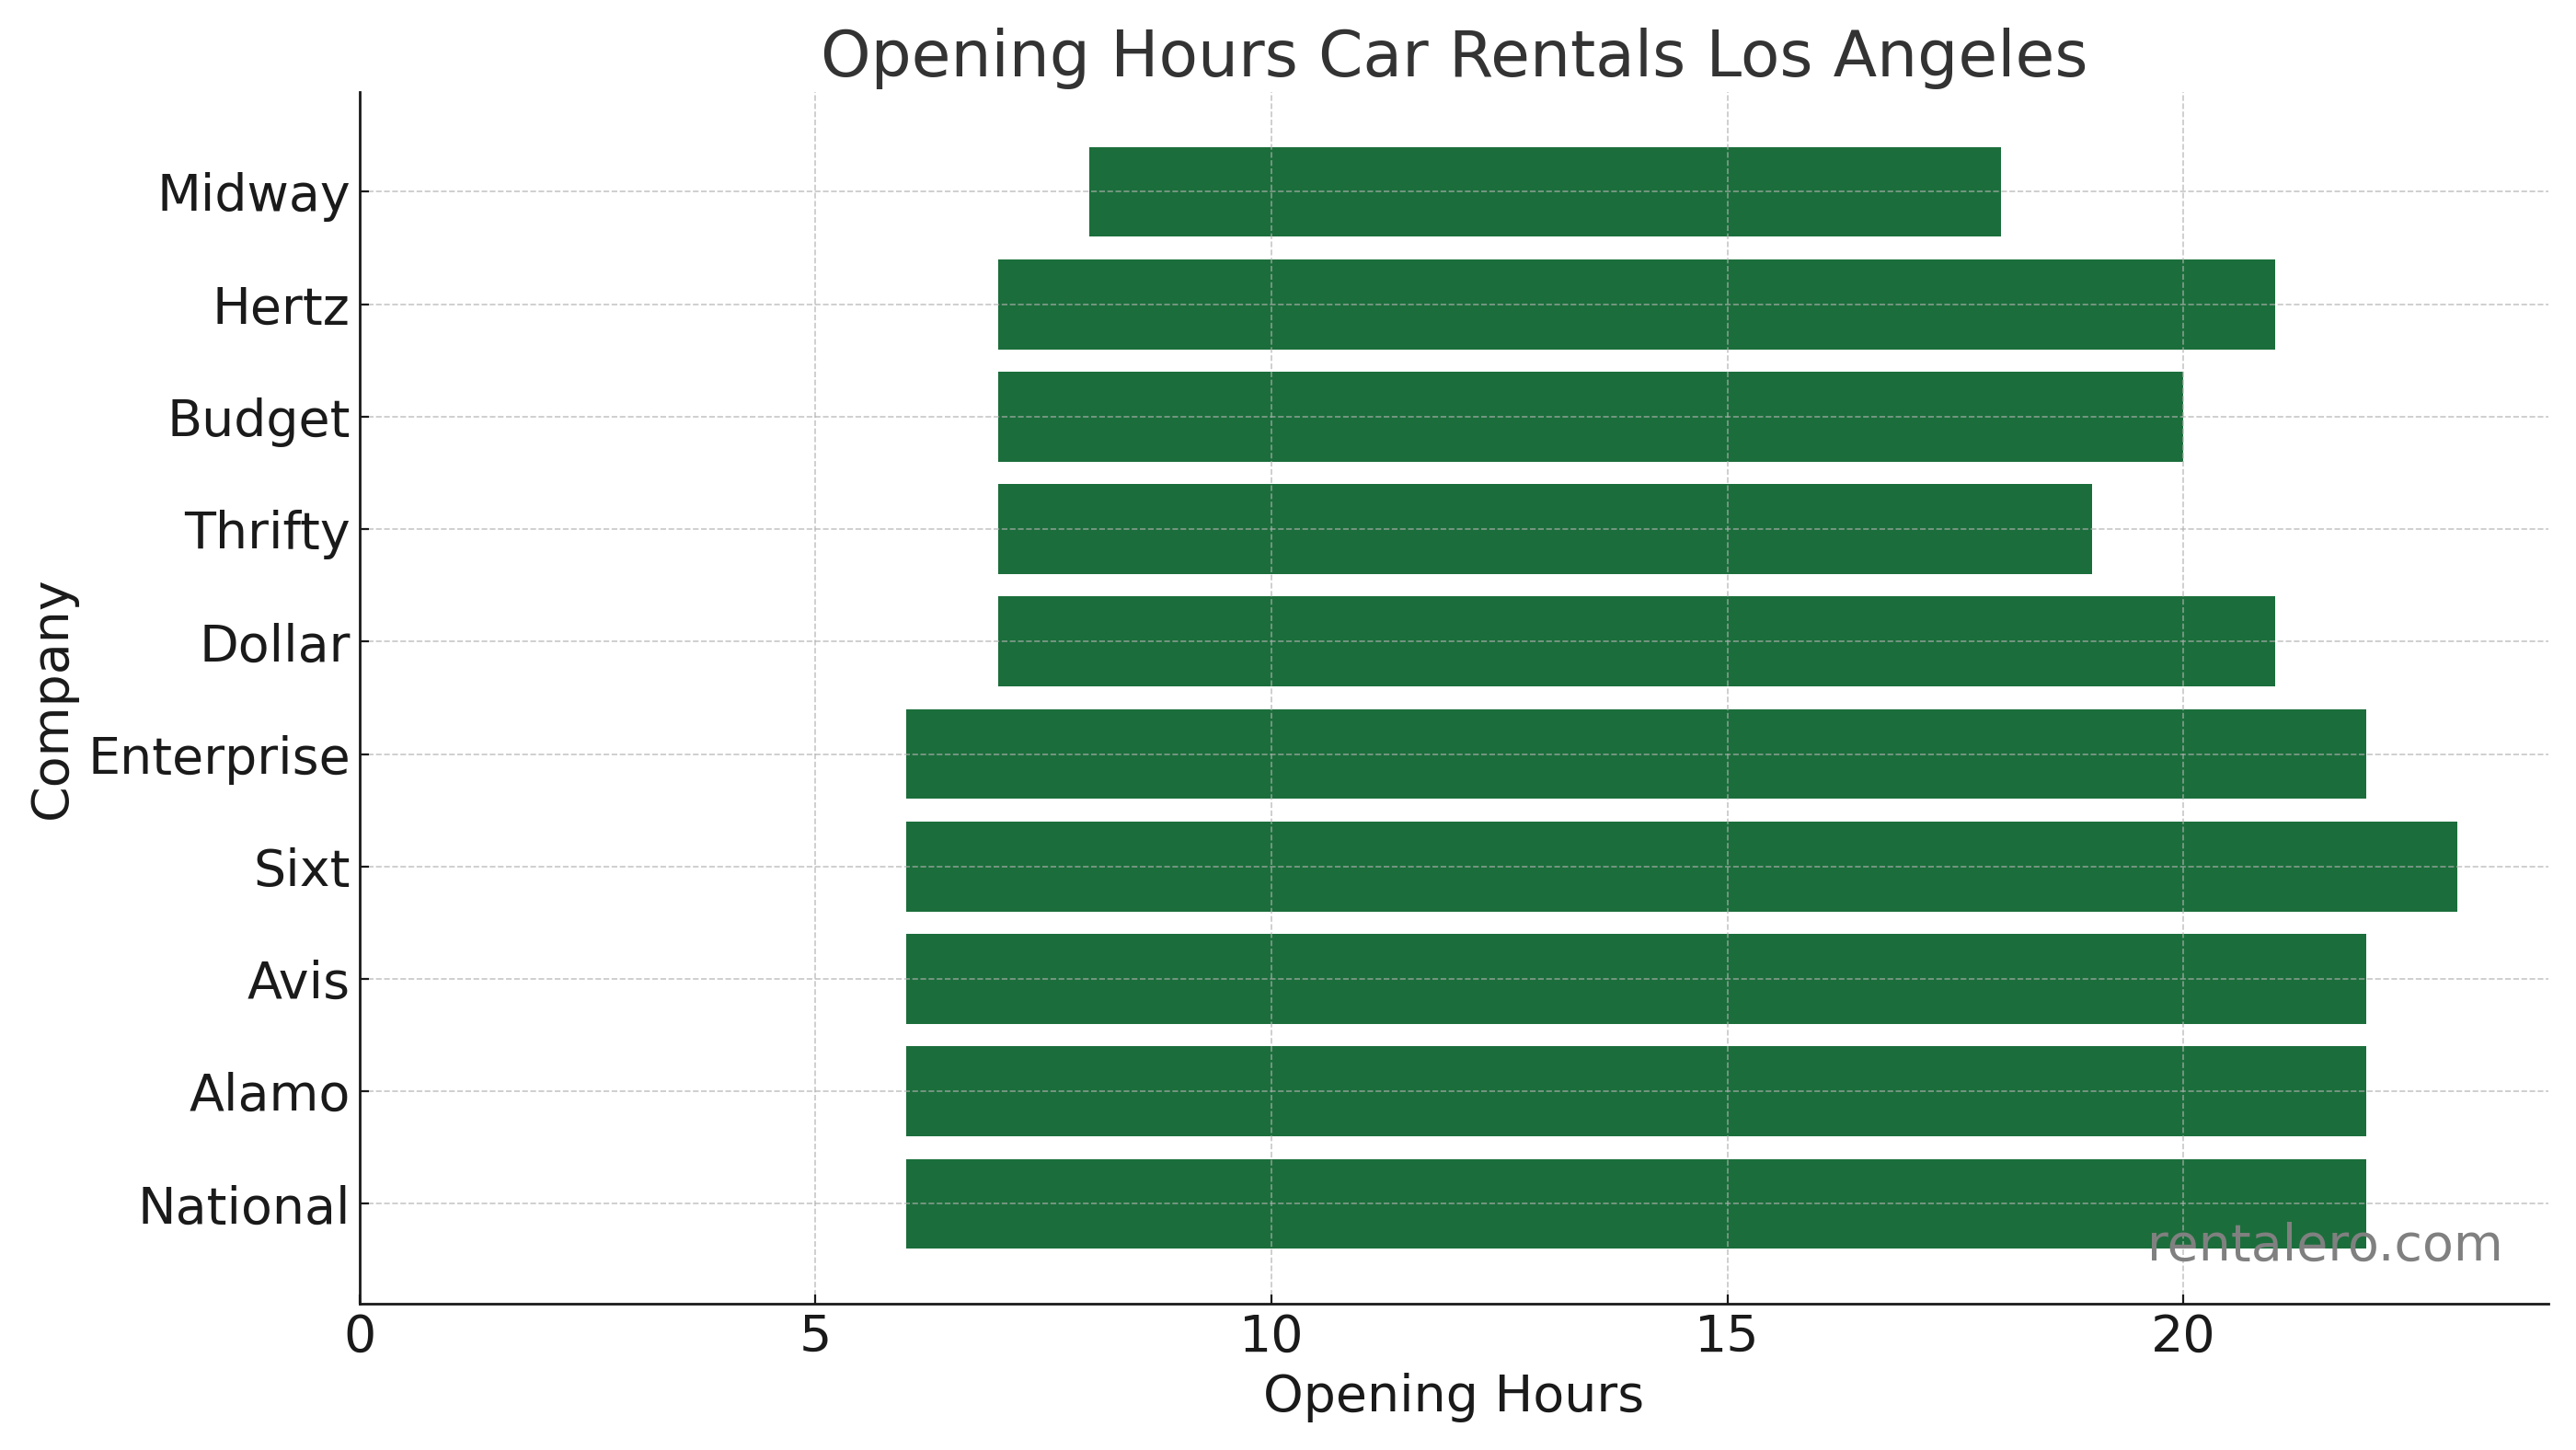 Los Angeles Car Rentals Opening Hours